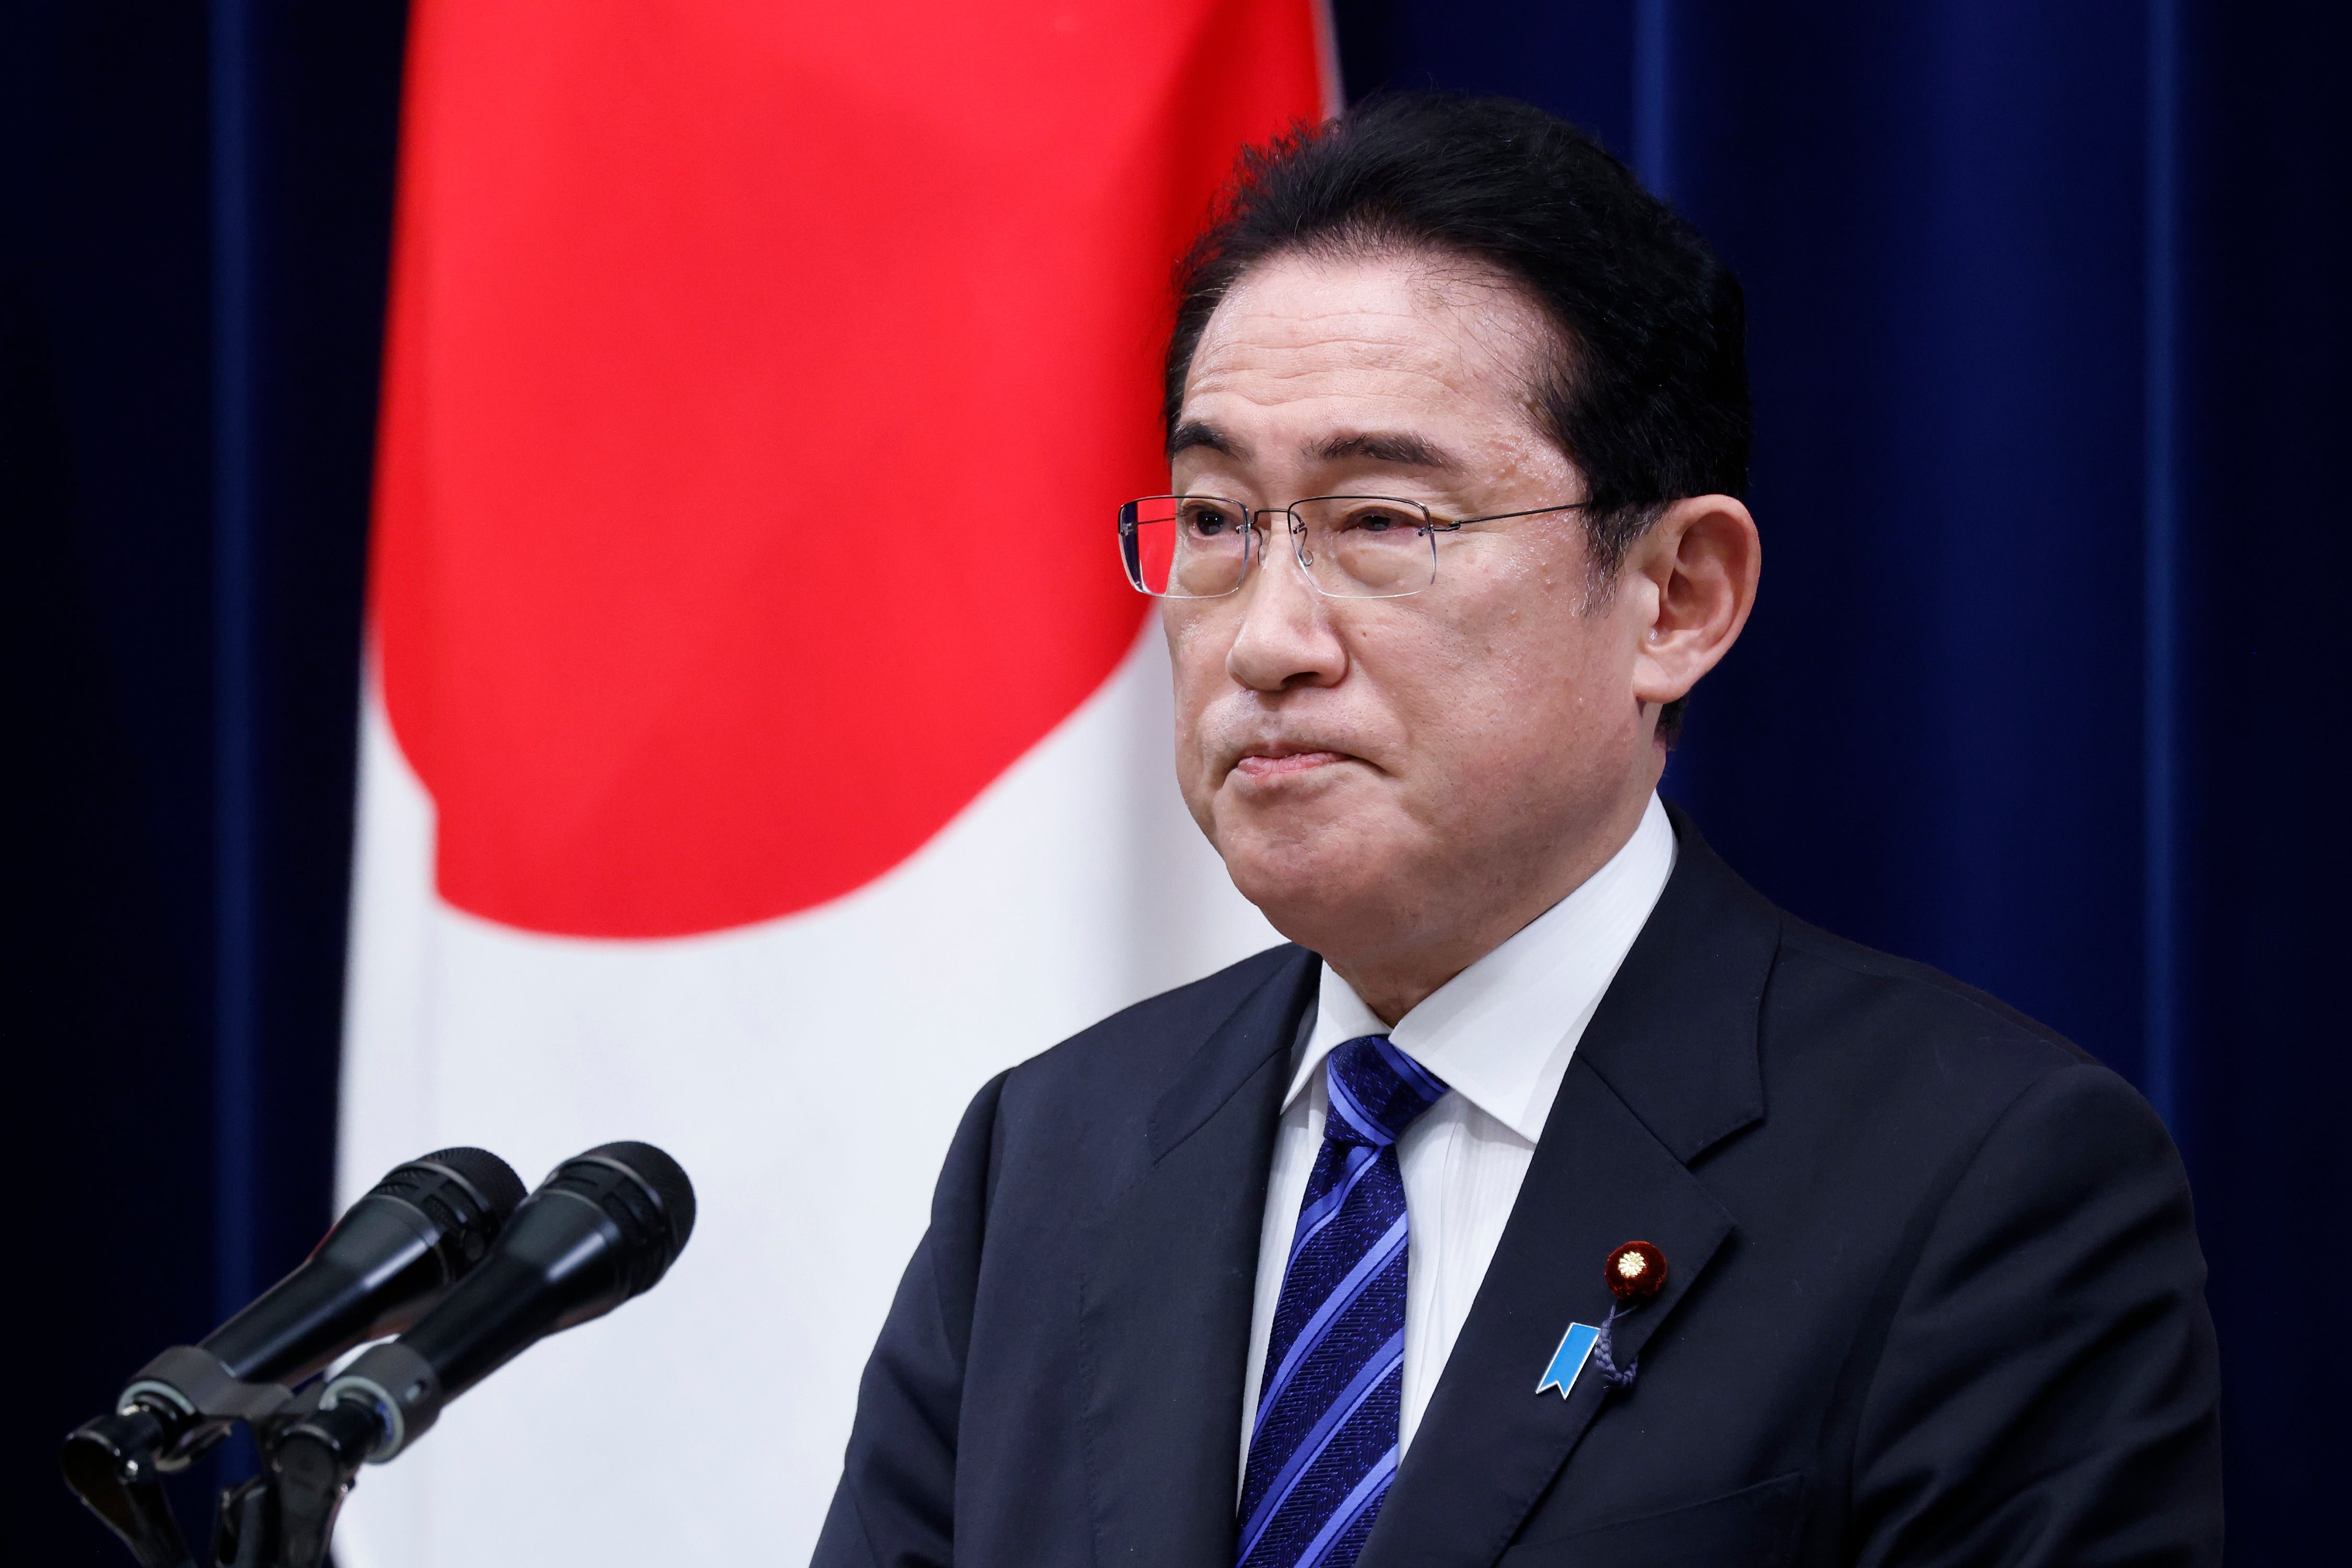 File. Japan's Prime Minister Fumio Kishida attends a joint news conference with South Korea's President Yoon Suk Yeol at the prime minister's official residence in Tokyo 16 March 2023